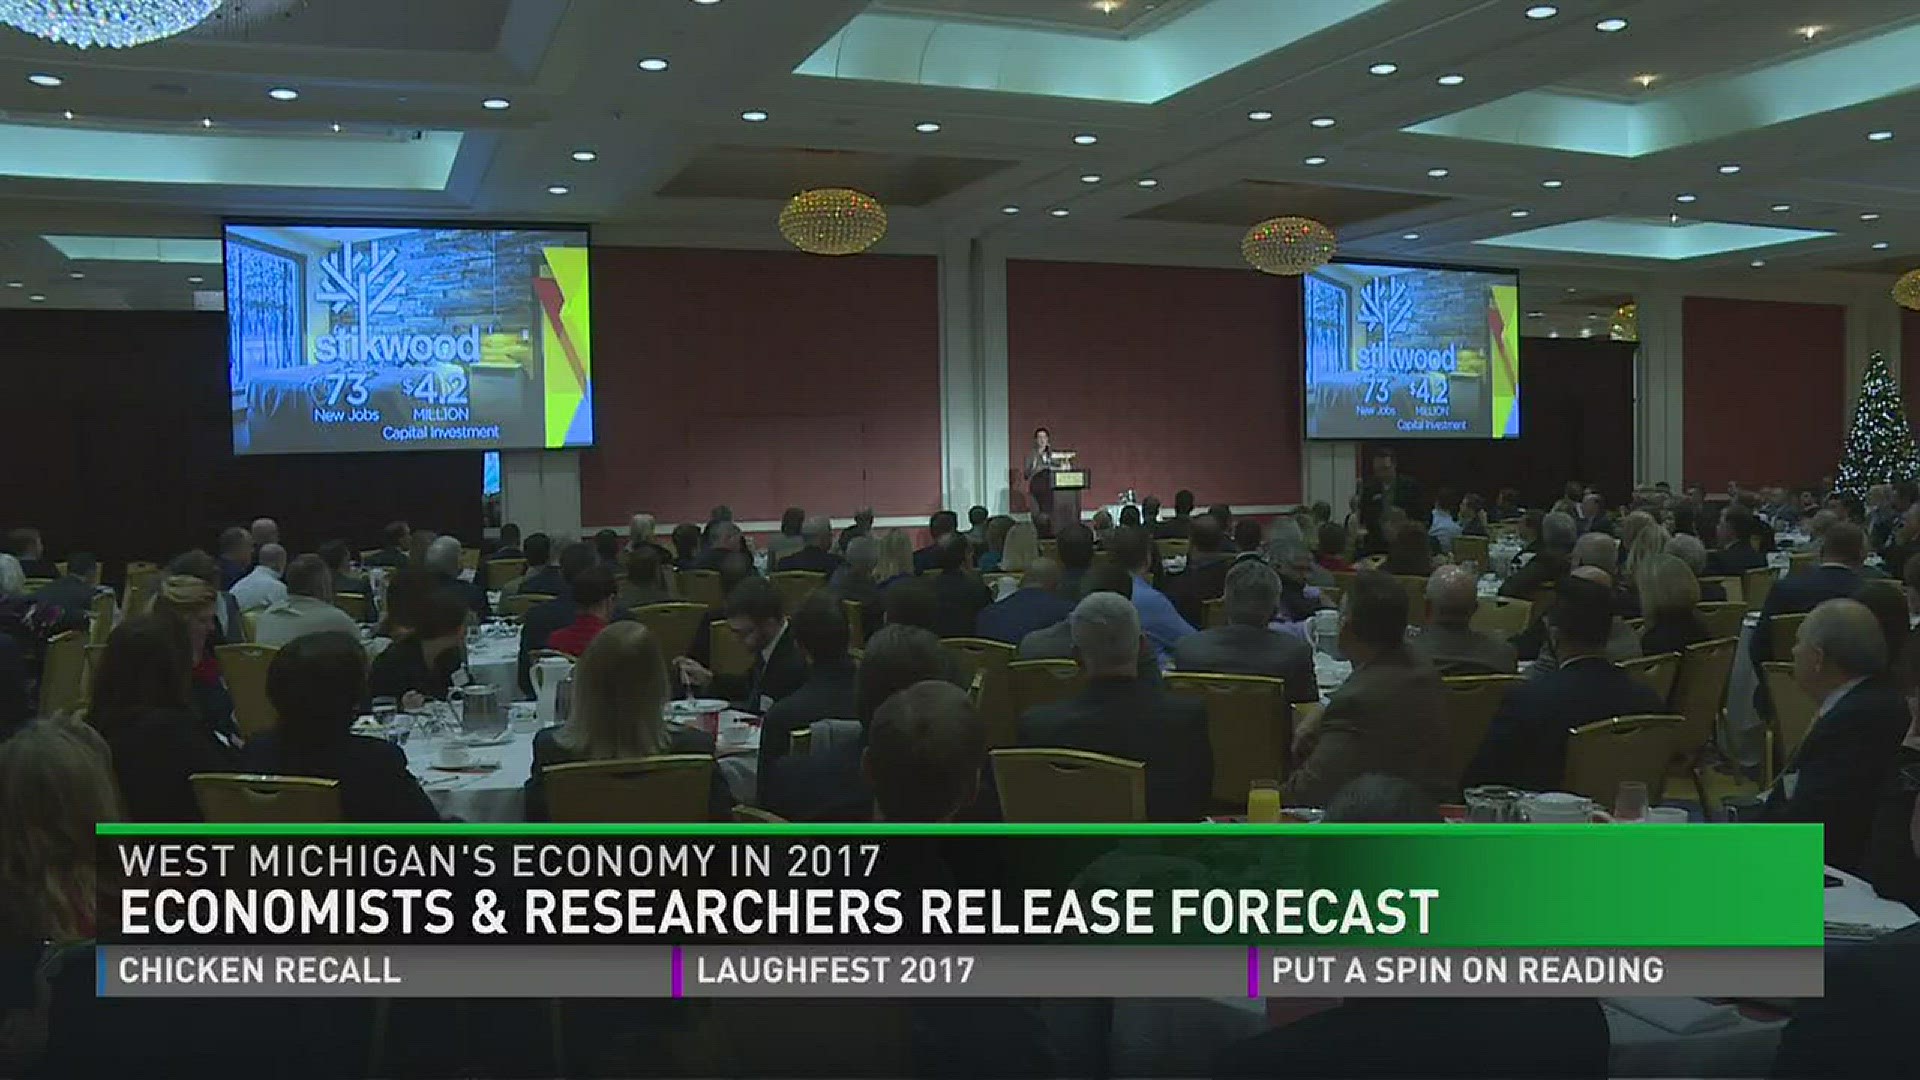 West Michigan economic leaders and researchers have released their 2017 economic forecast for our area.